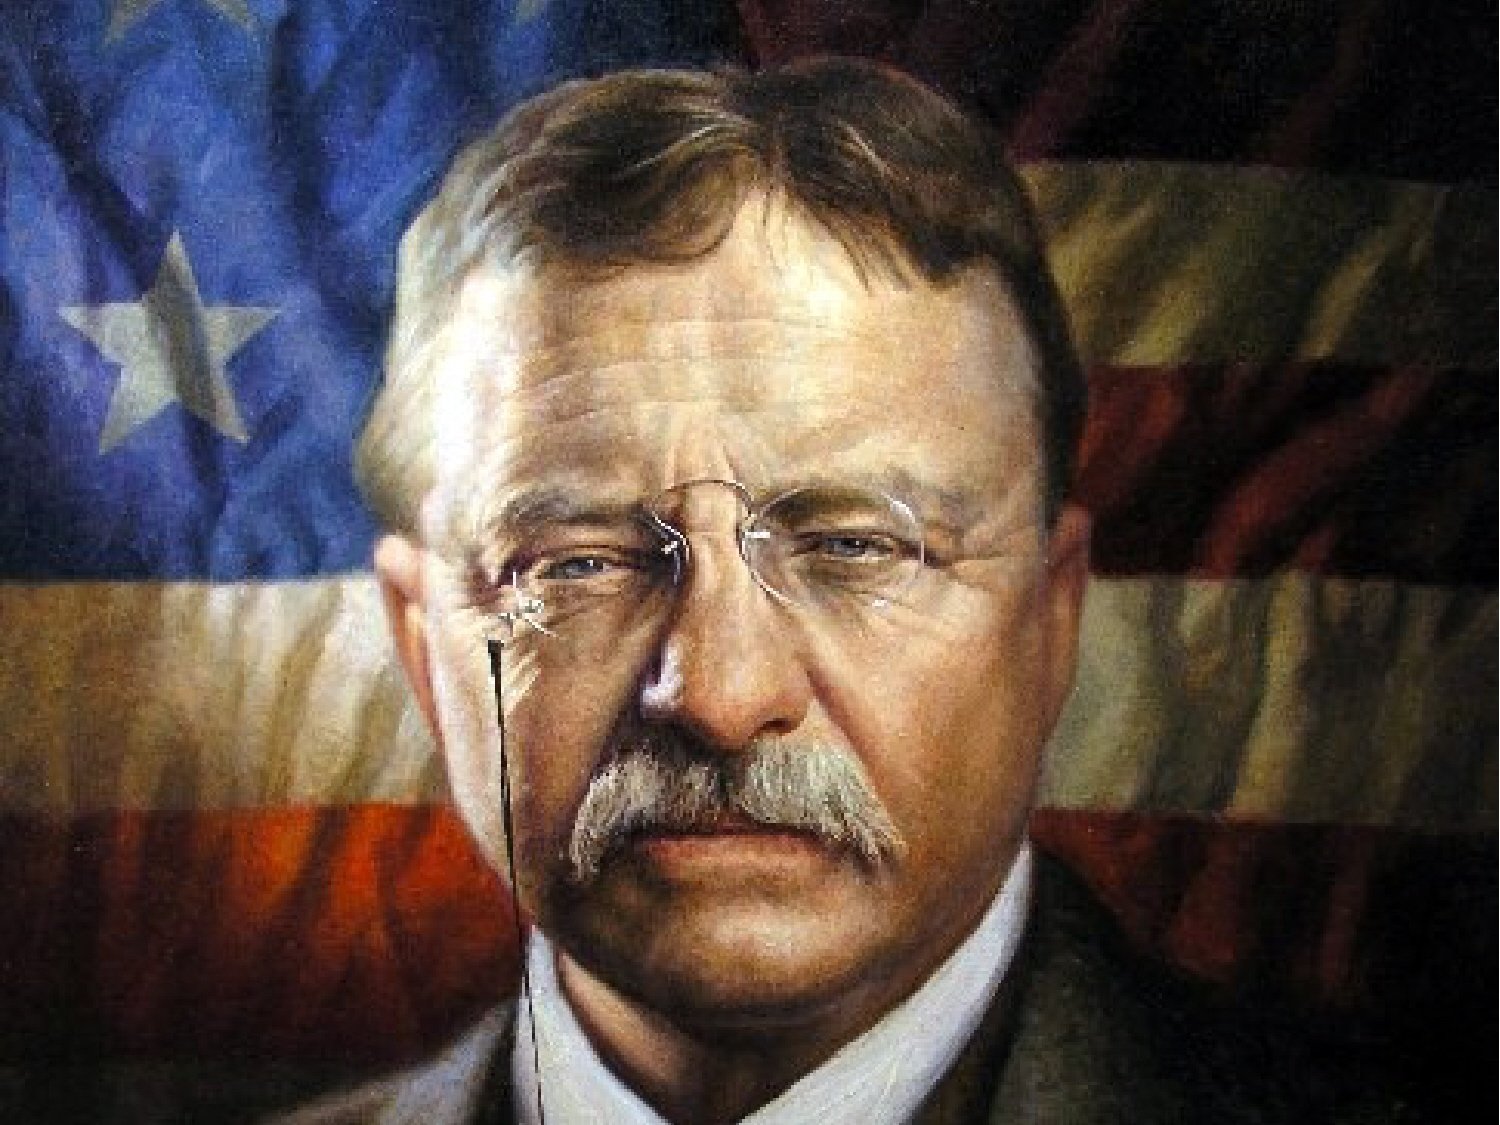 http://www.globalresearch.ca/wp-content/uploads/2014/09/theodore-teddy-roosevelt-1a.jpg